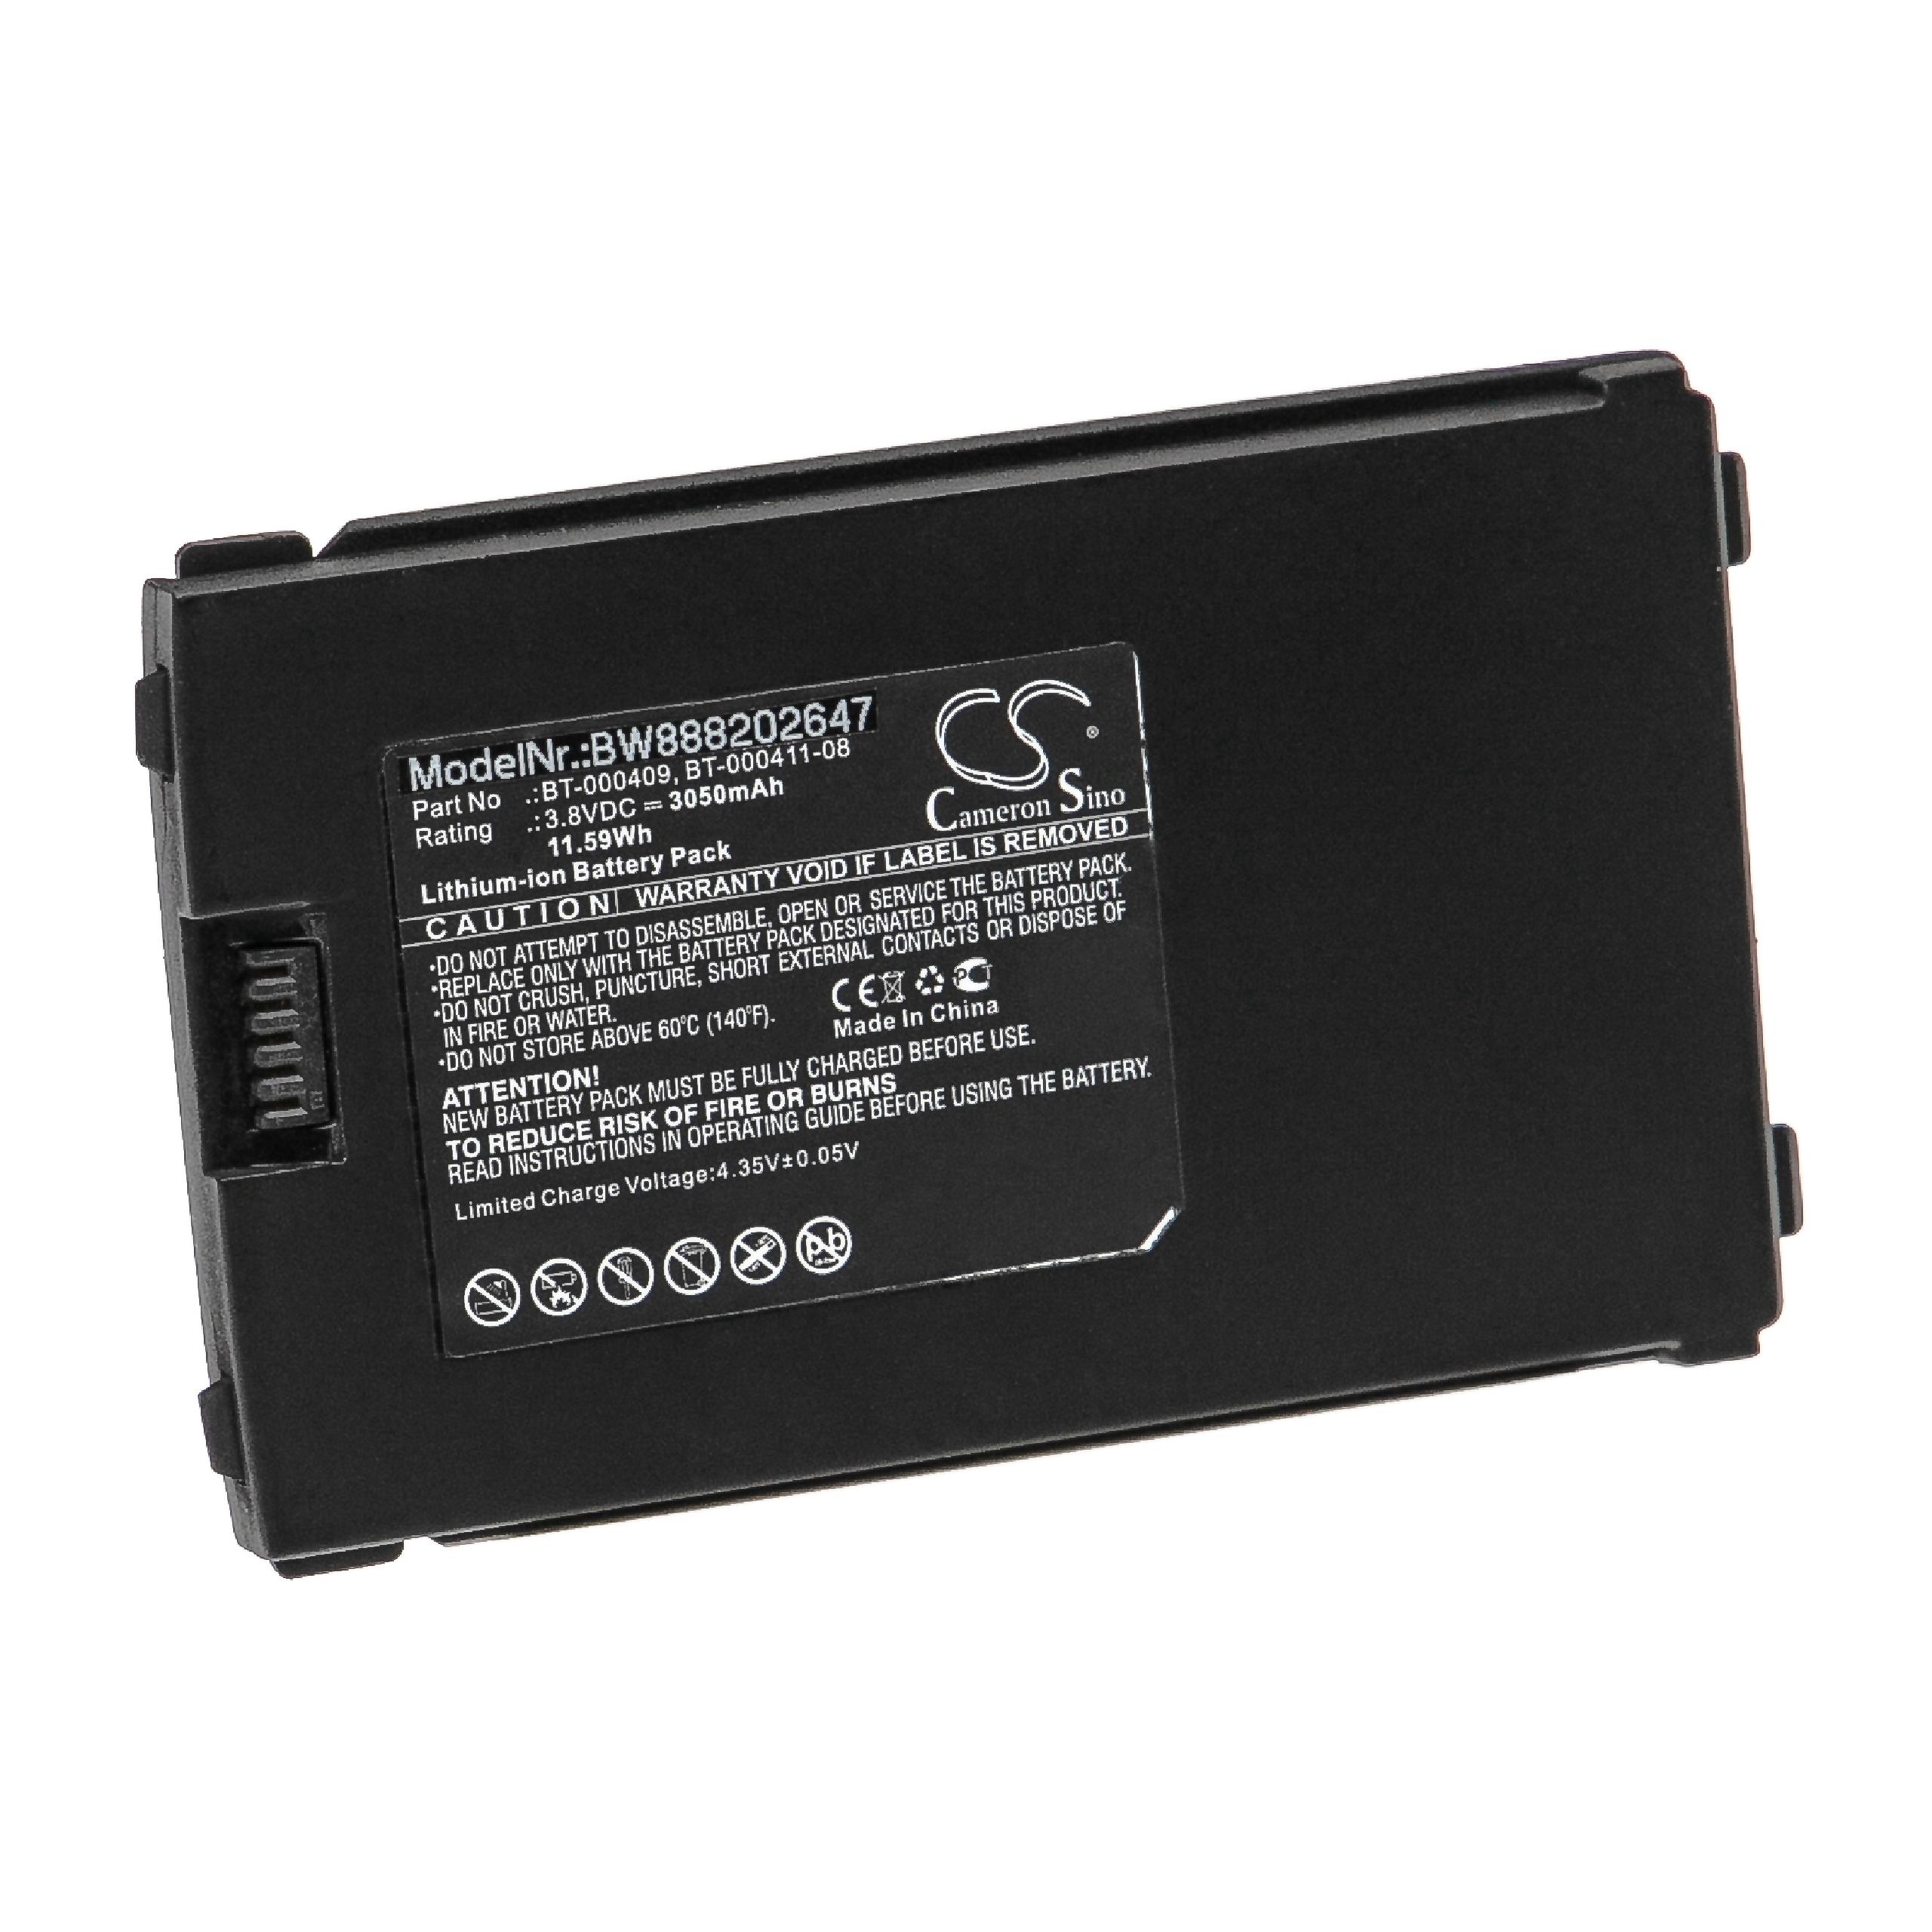 Handheld Computer Battery Replacement for Zebra BT-000409, BTRY-TC2Y-1XMA1-01, BT-000411-08 - 3050mAh, 3.8V